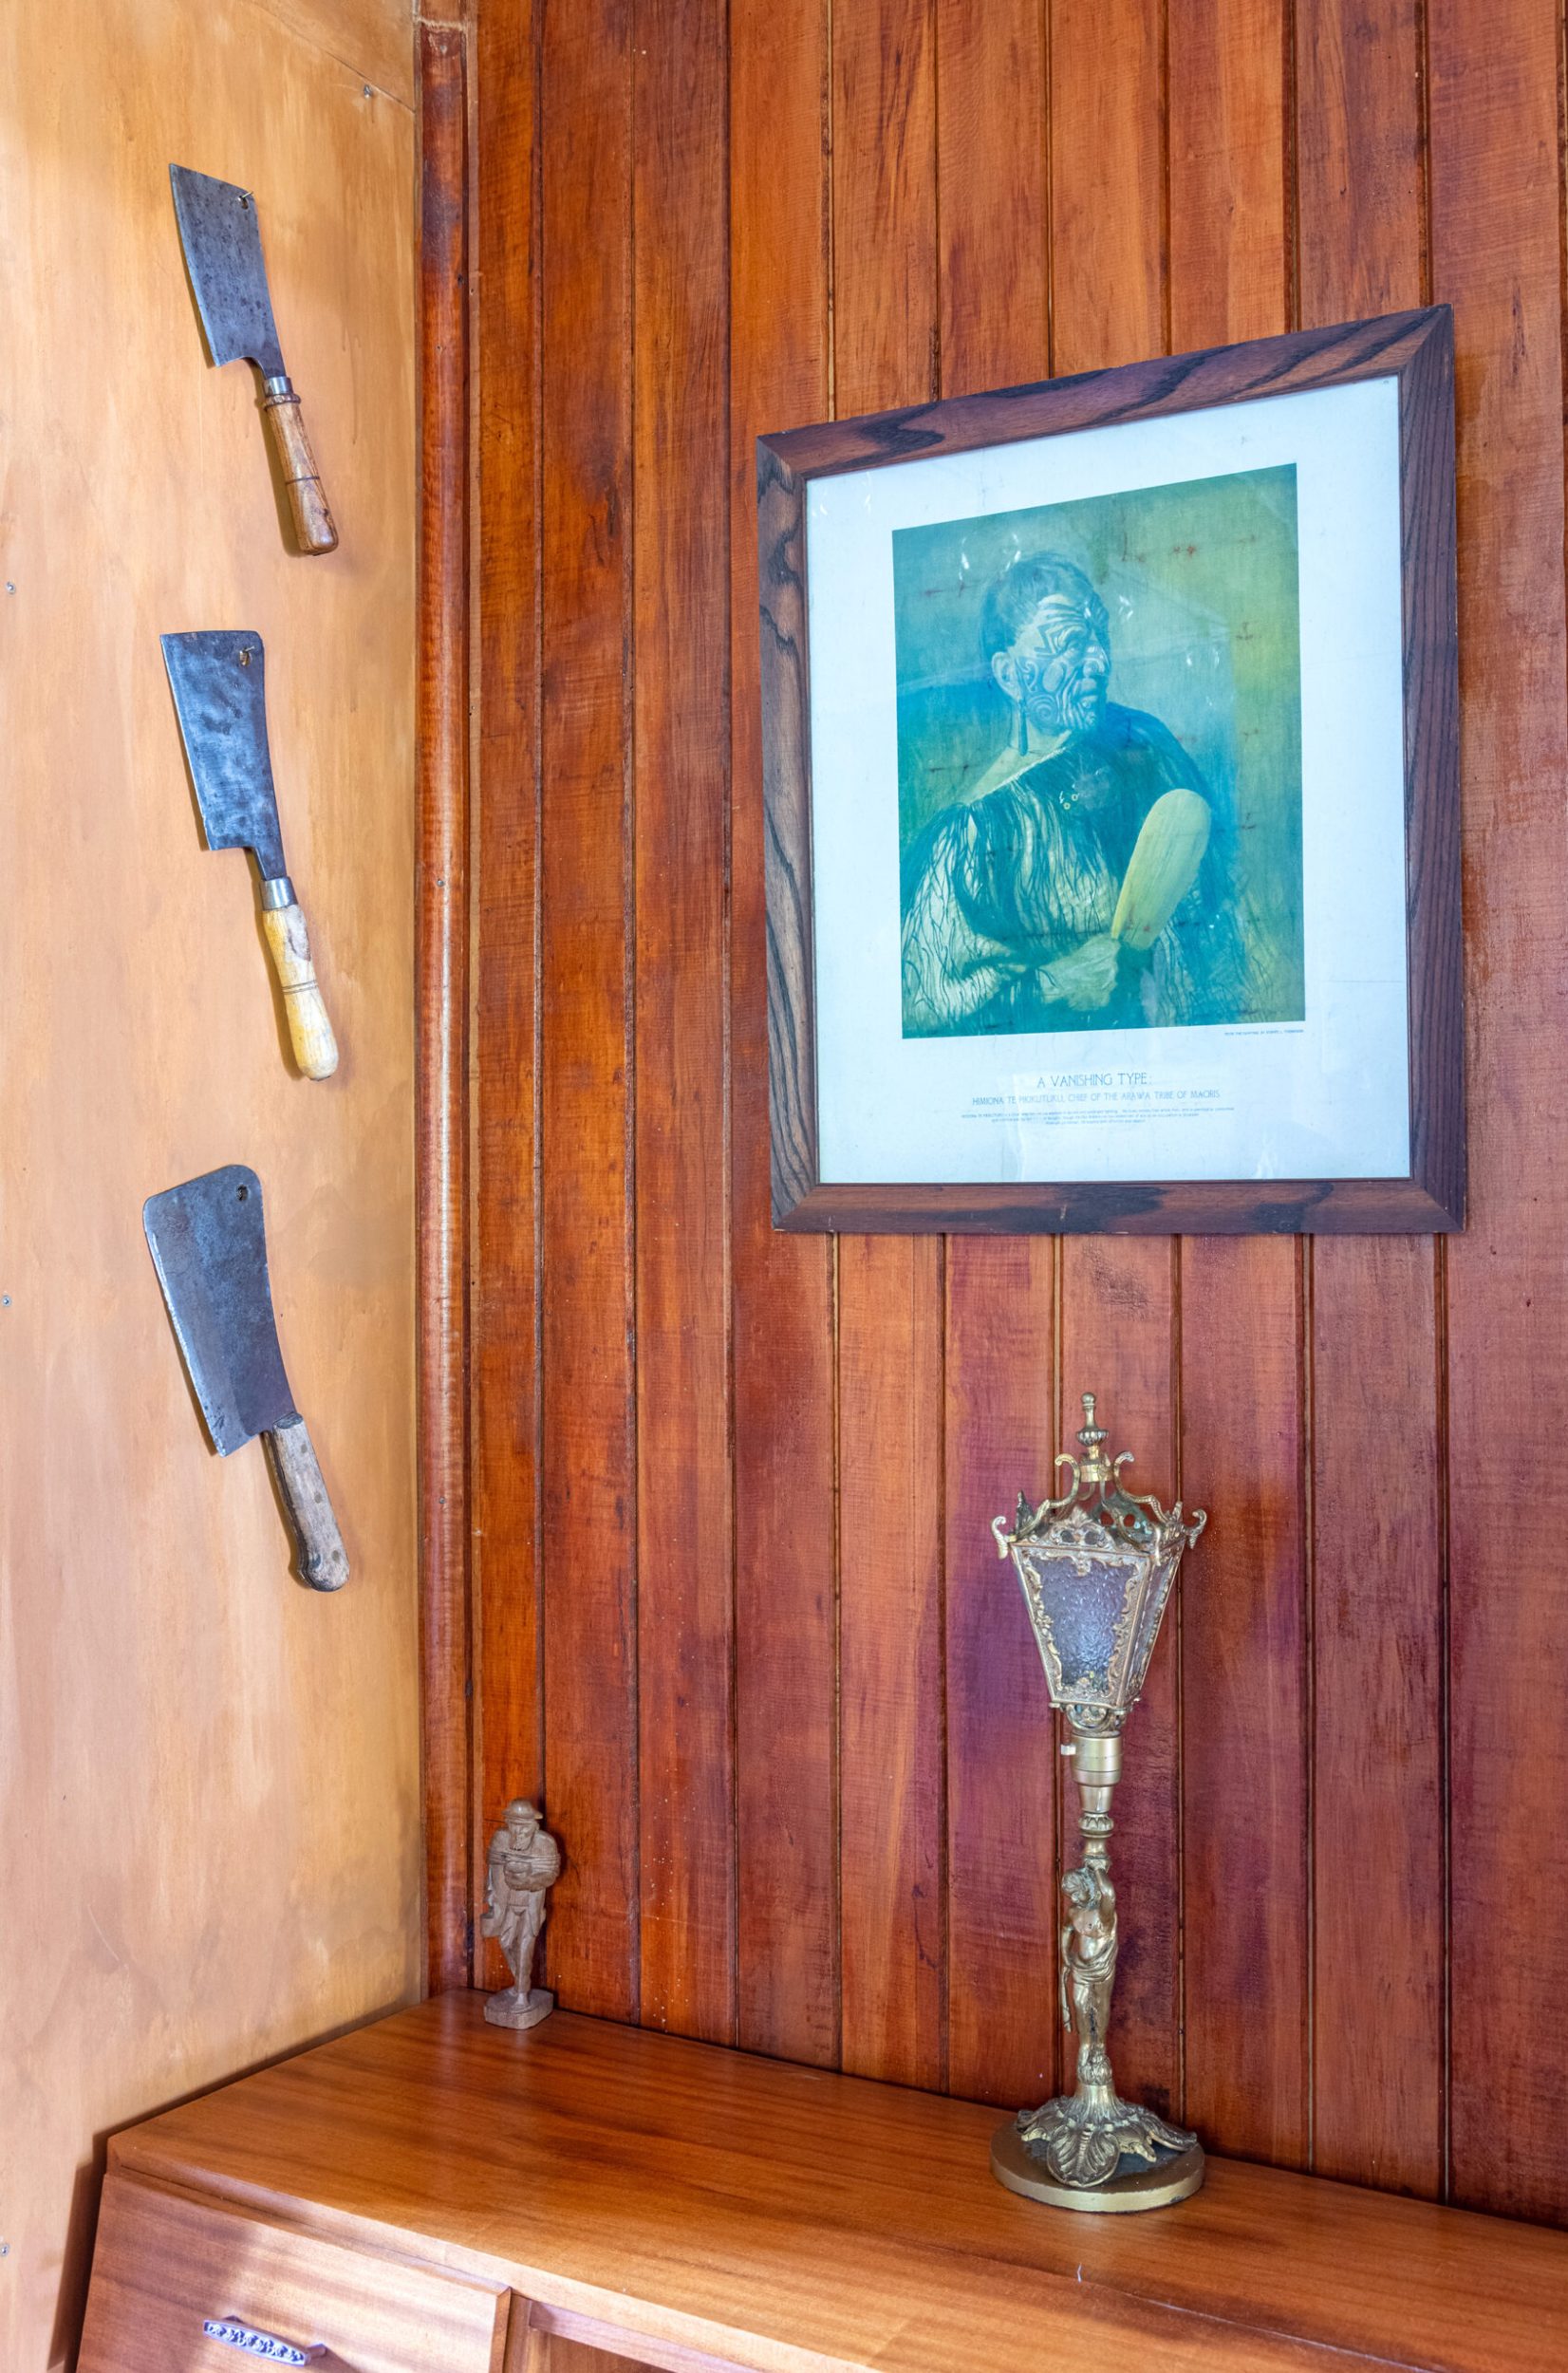 Wood panelled wall with hanging decorated cleaver knives, hanging Māori artwork and a religious ornament